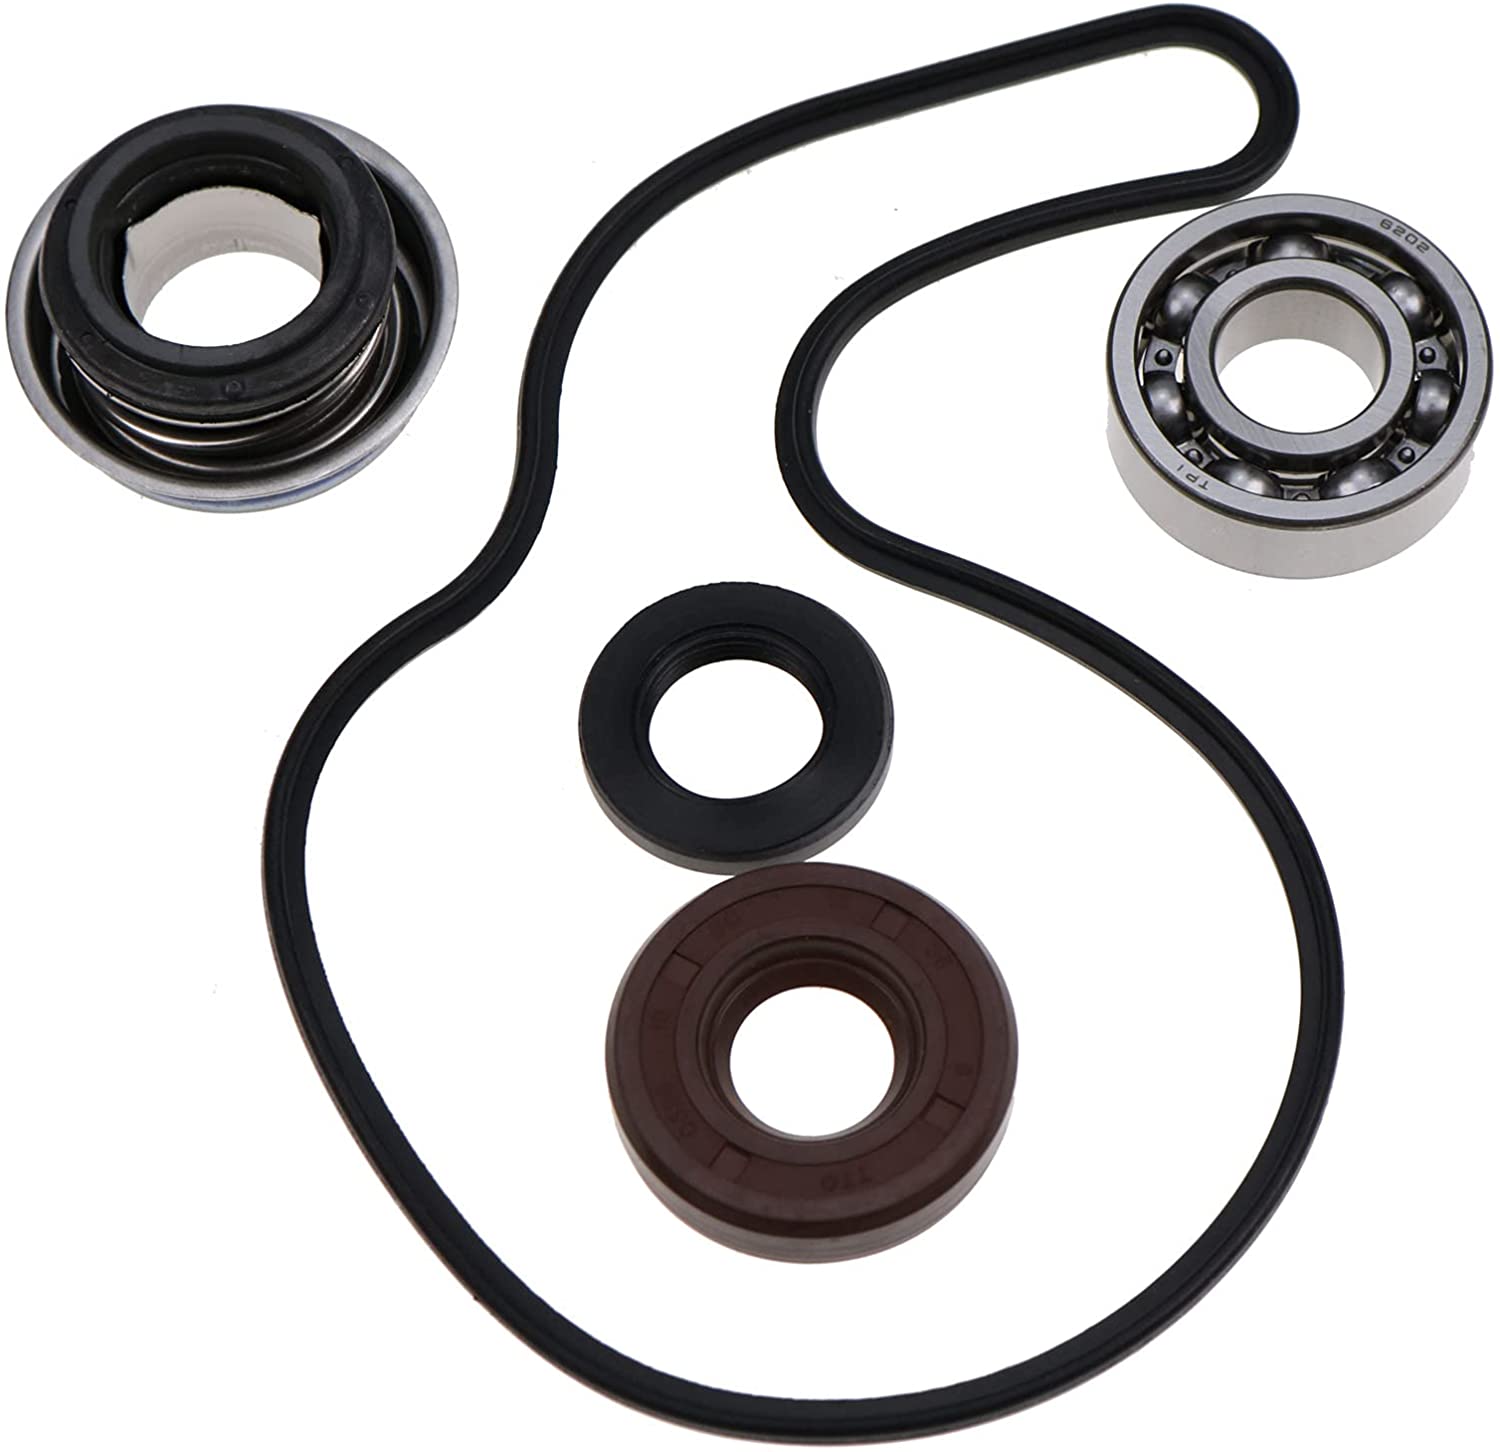 Water Pump Rebuild Kit 3610075 Replacement with Billet Aluminum Water Driver Impeller Seal Compatible with Polaris RZR Sportsman Ranger 800 2008 2009 2010 2011 2012 2013 2014 - KUDUPARTS